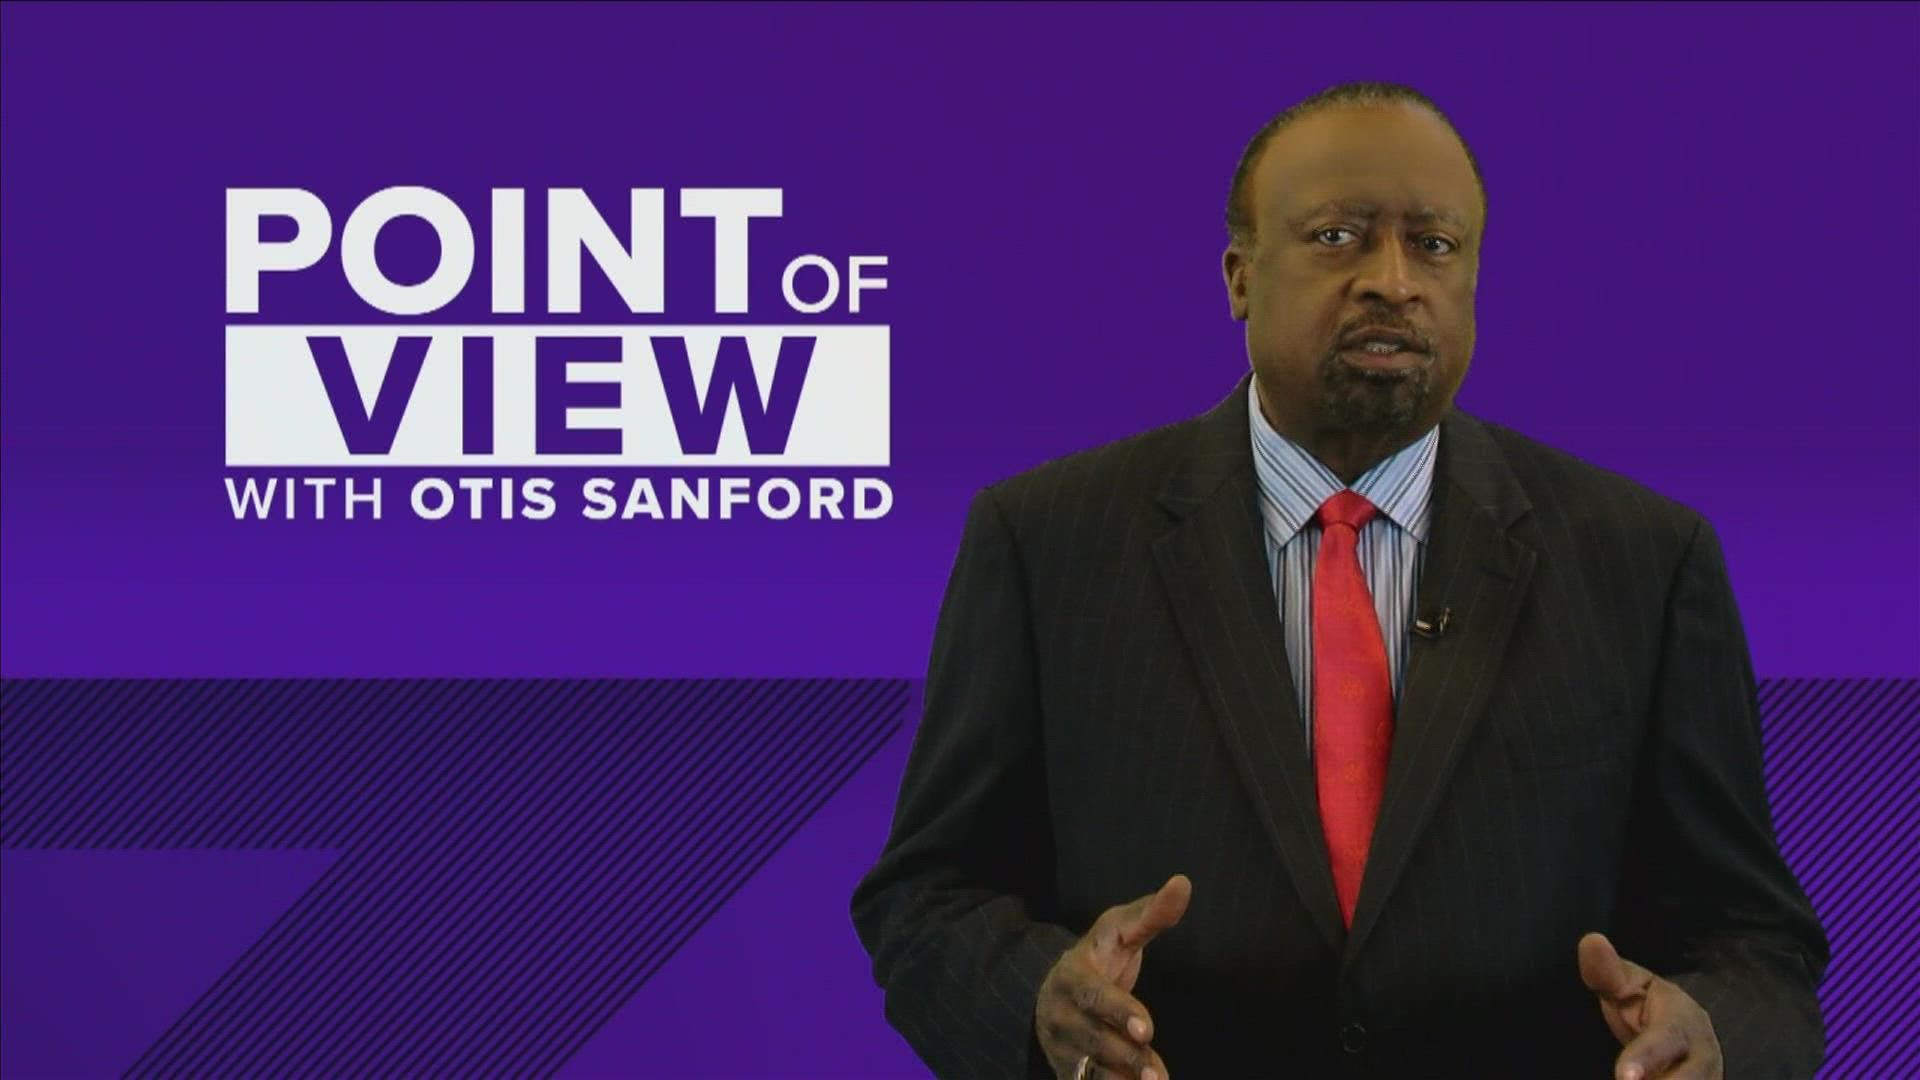 ABC24 political analyst and commentator Otis Sanford shared his point of view on the November midterm elections.